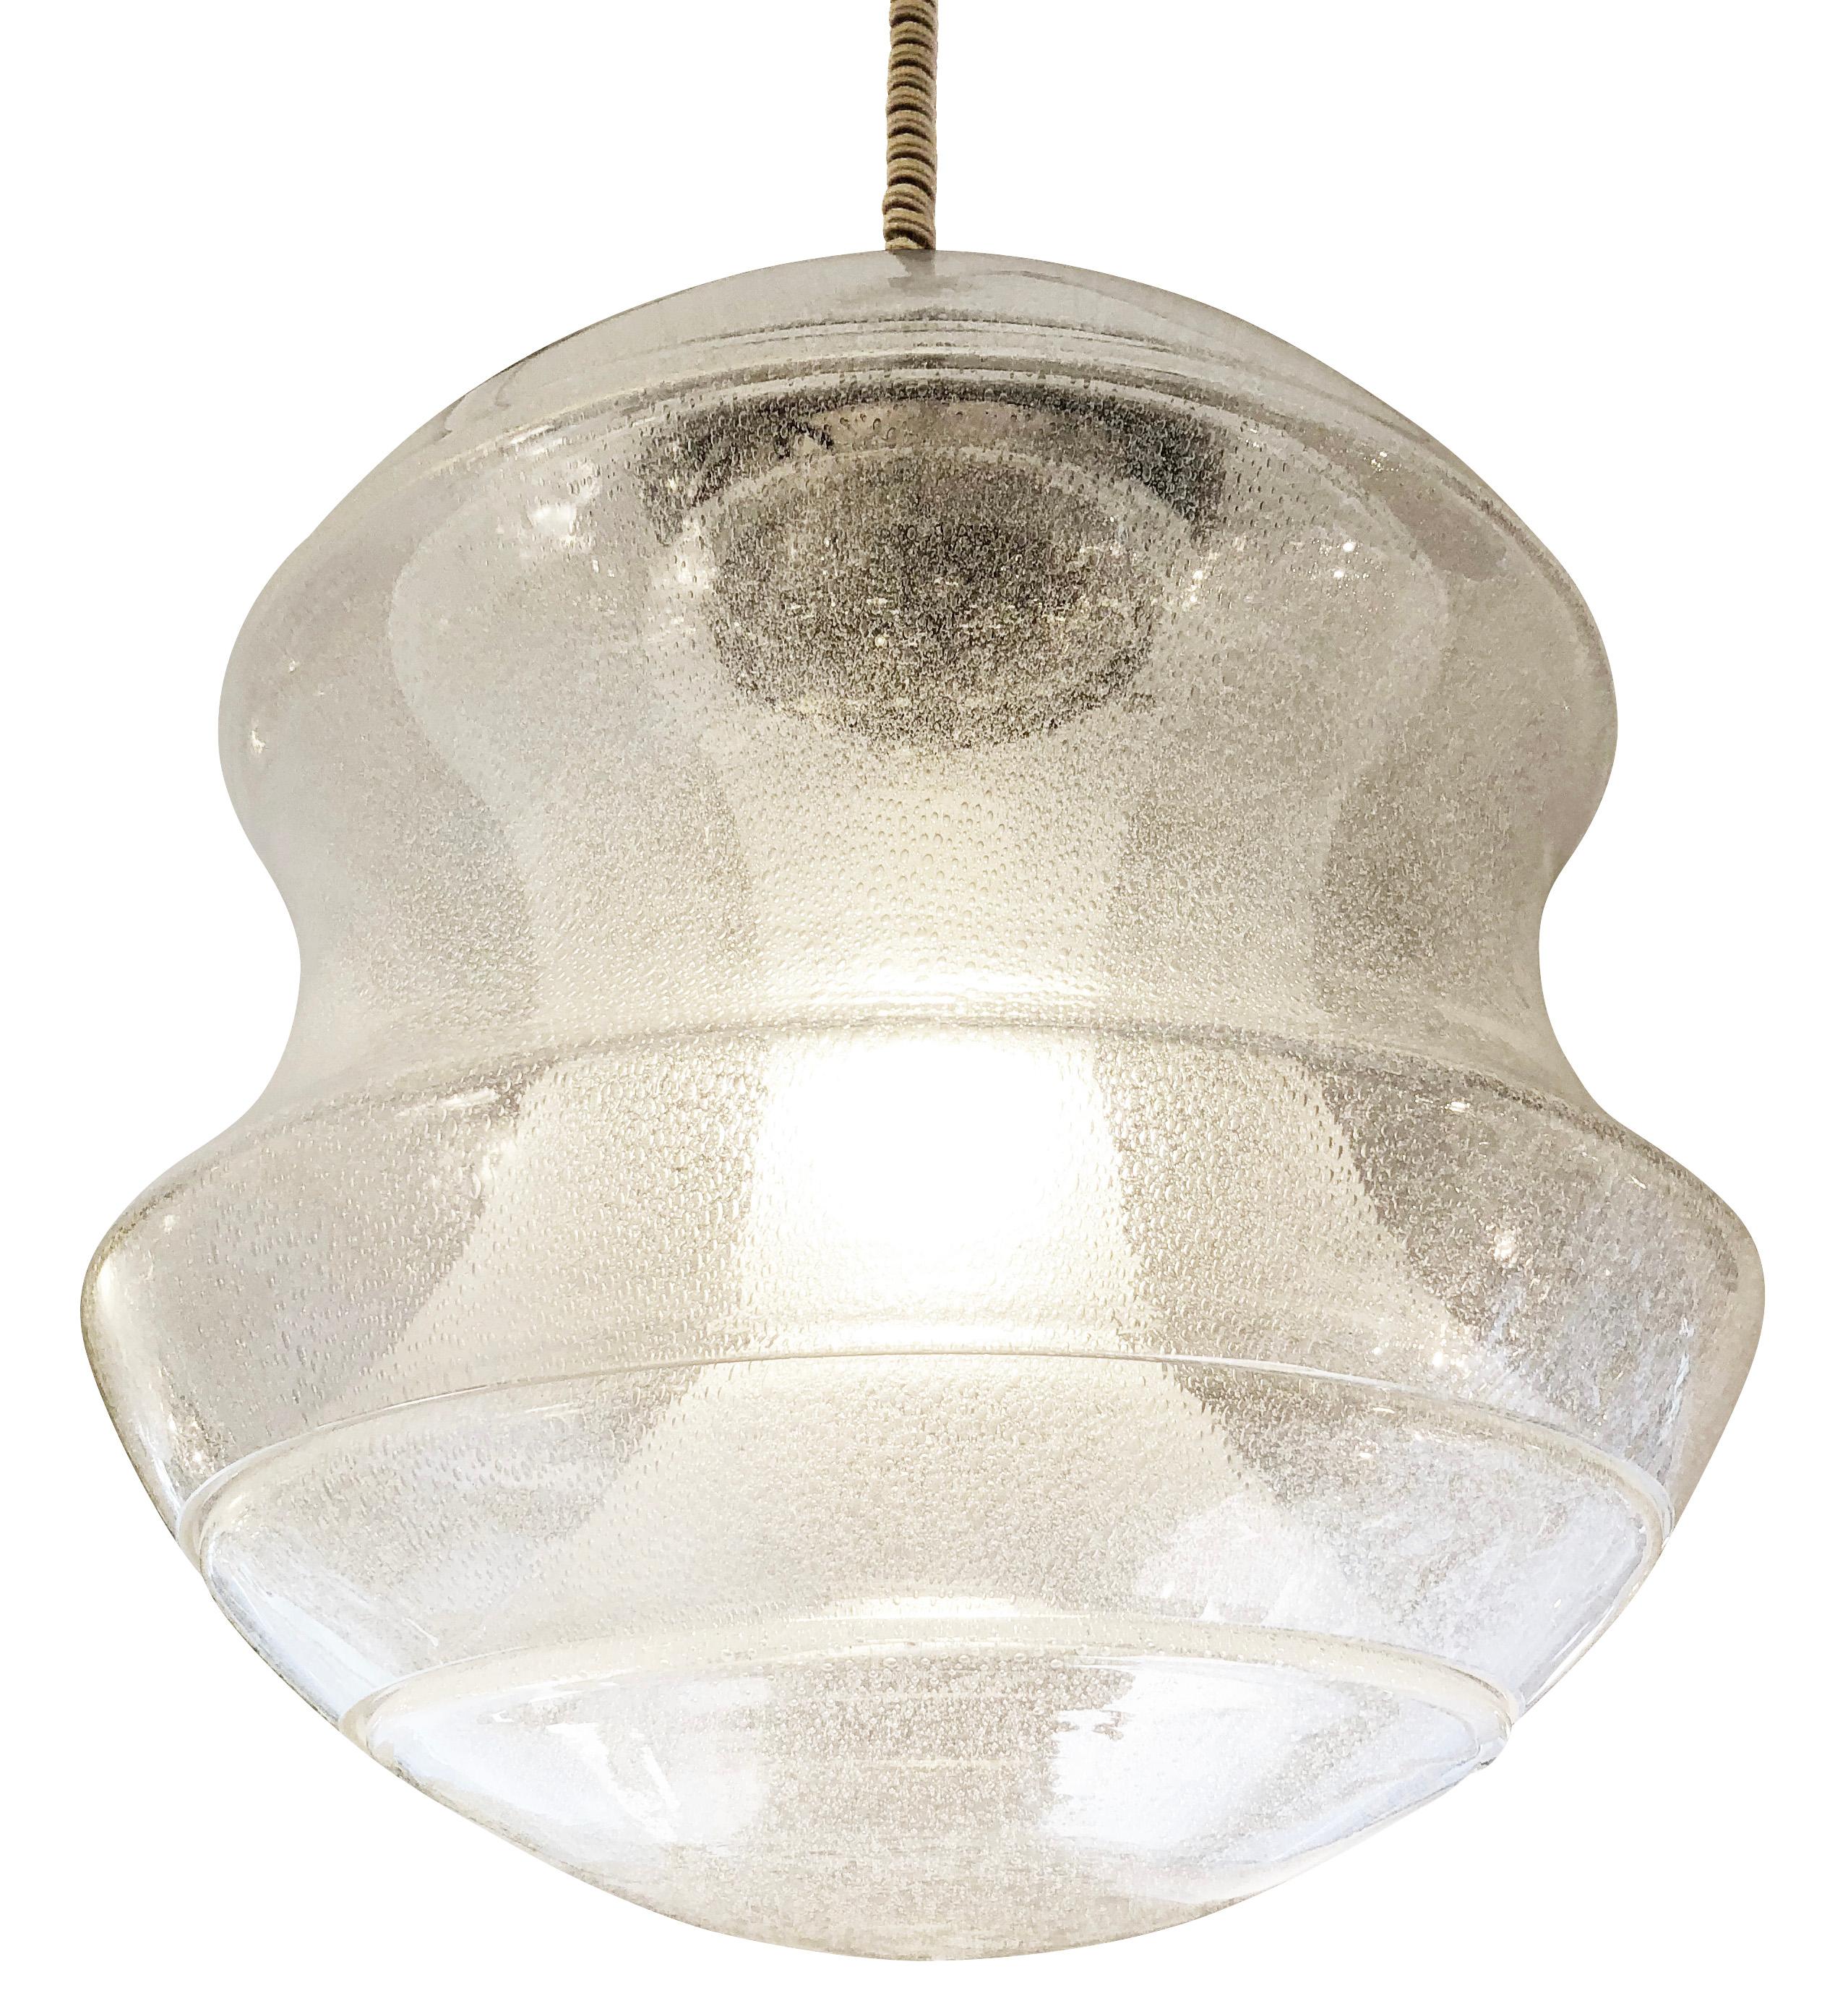 Beautiful hourglass shaped Murano glass pendant designed by Carlo Nason for Mazzega in the 1960s. Features three interlocking glasses made in the “Pulegoso” technique (glass with bubbles). Hardware is nickel and holds one Edison socket. Original